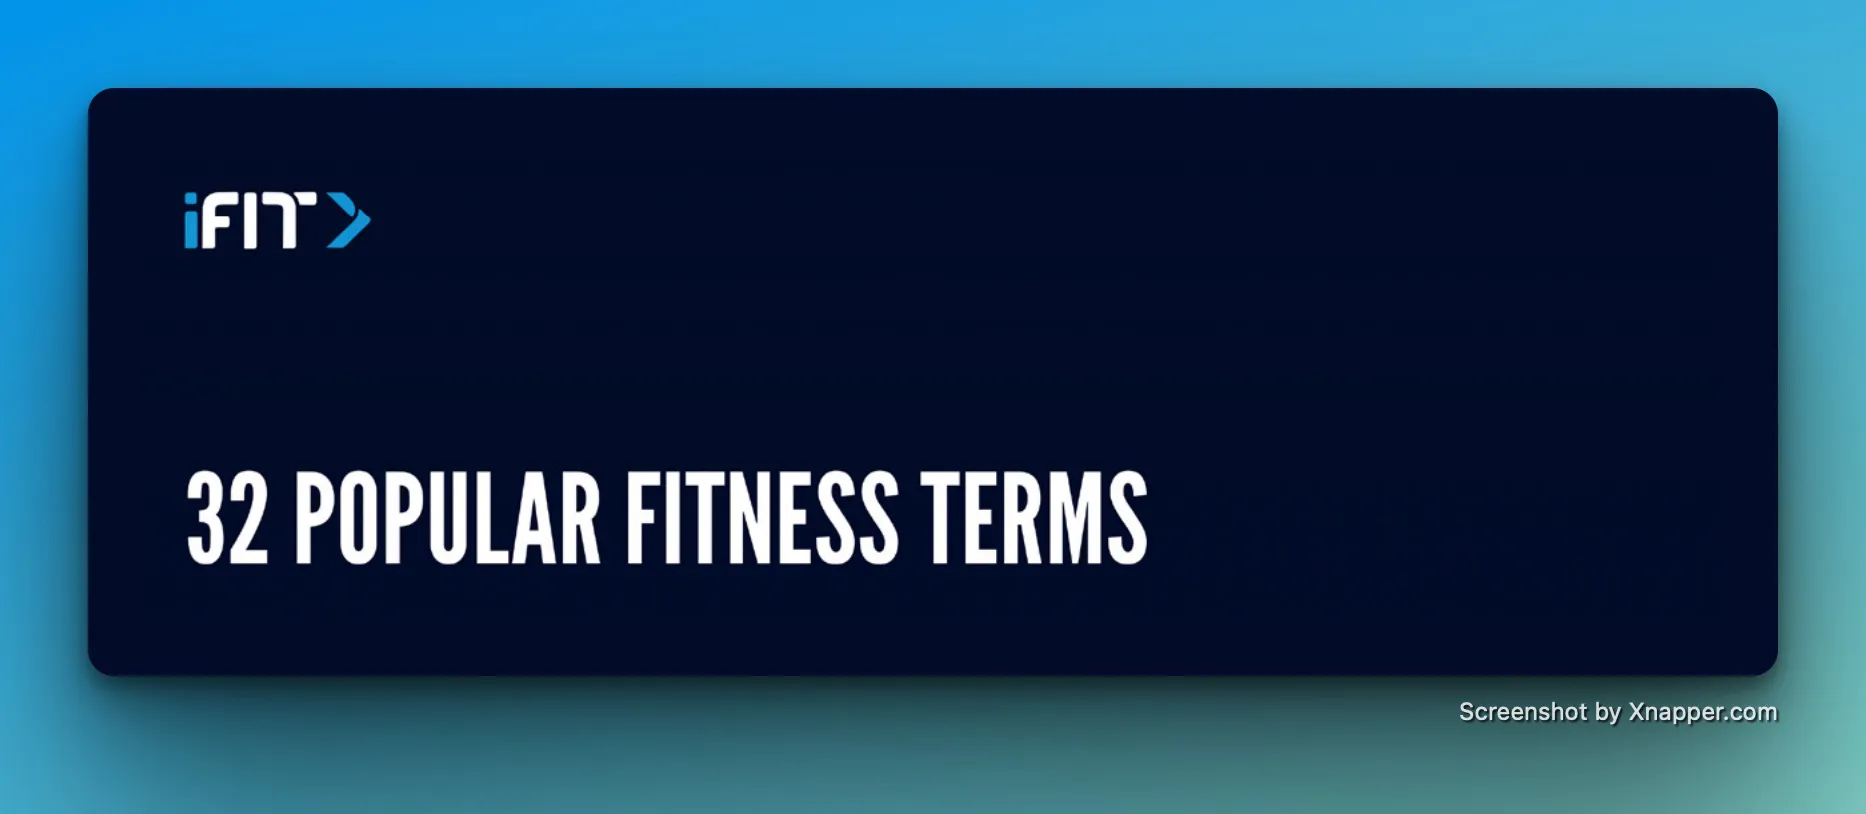 Popular iFit Fitness Terms